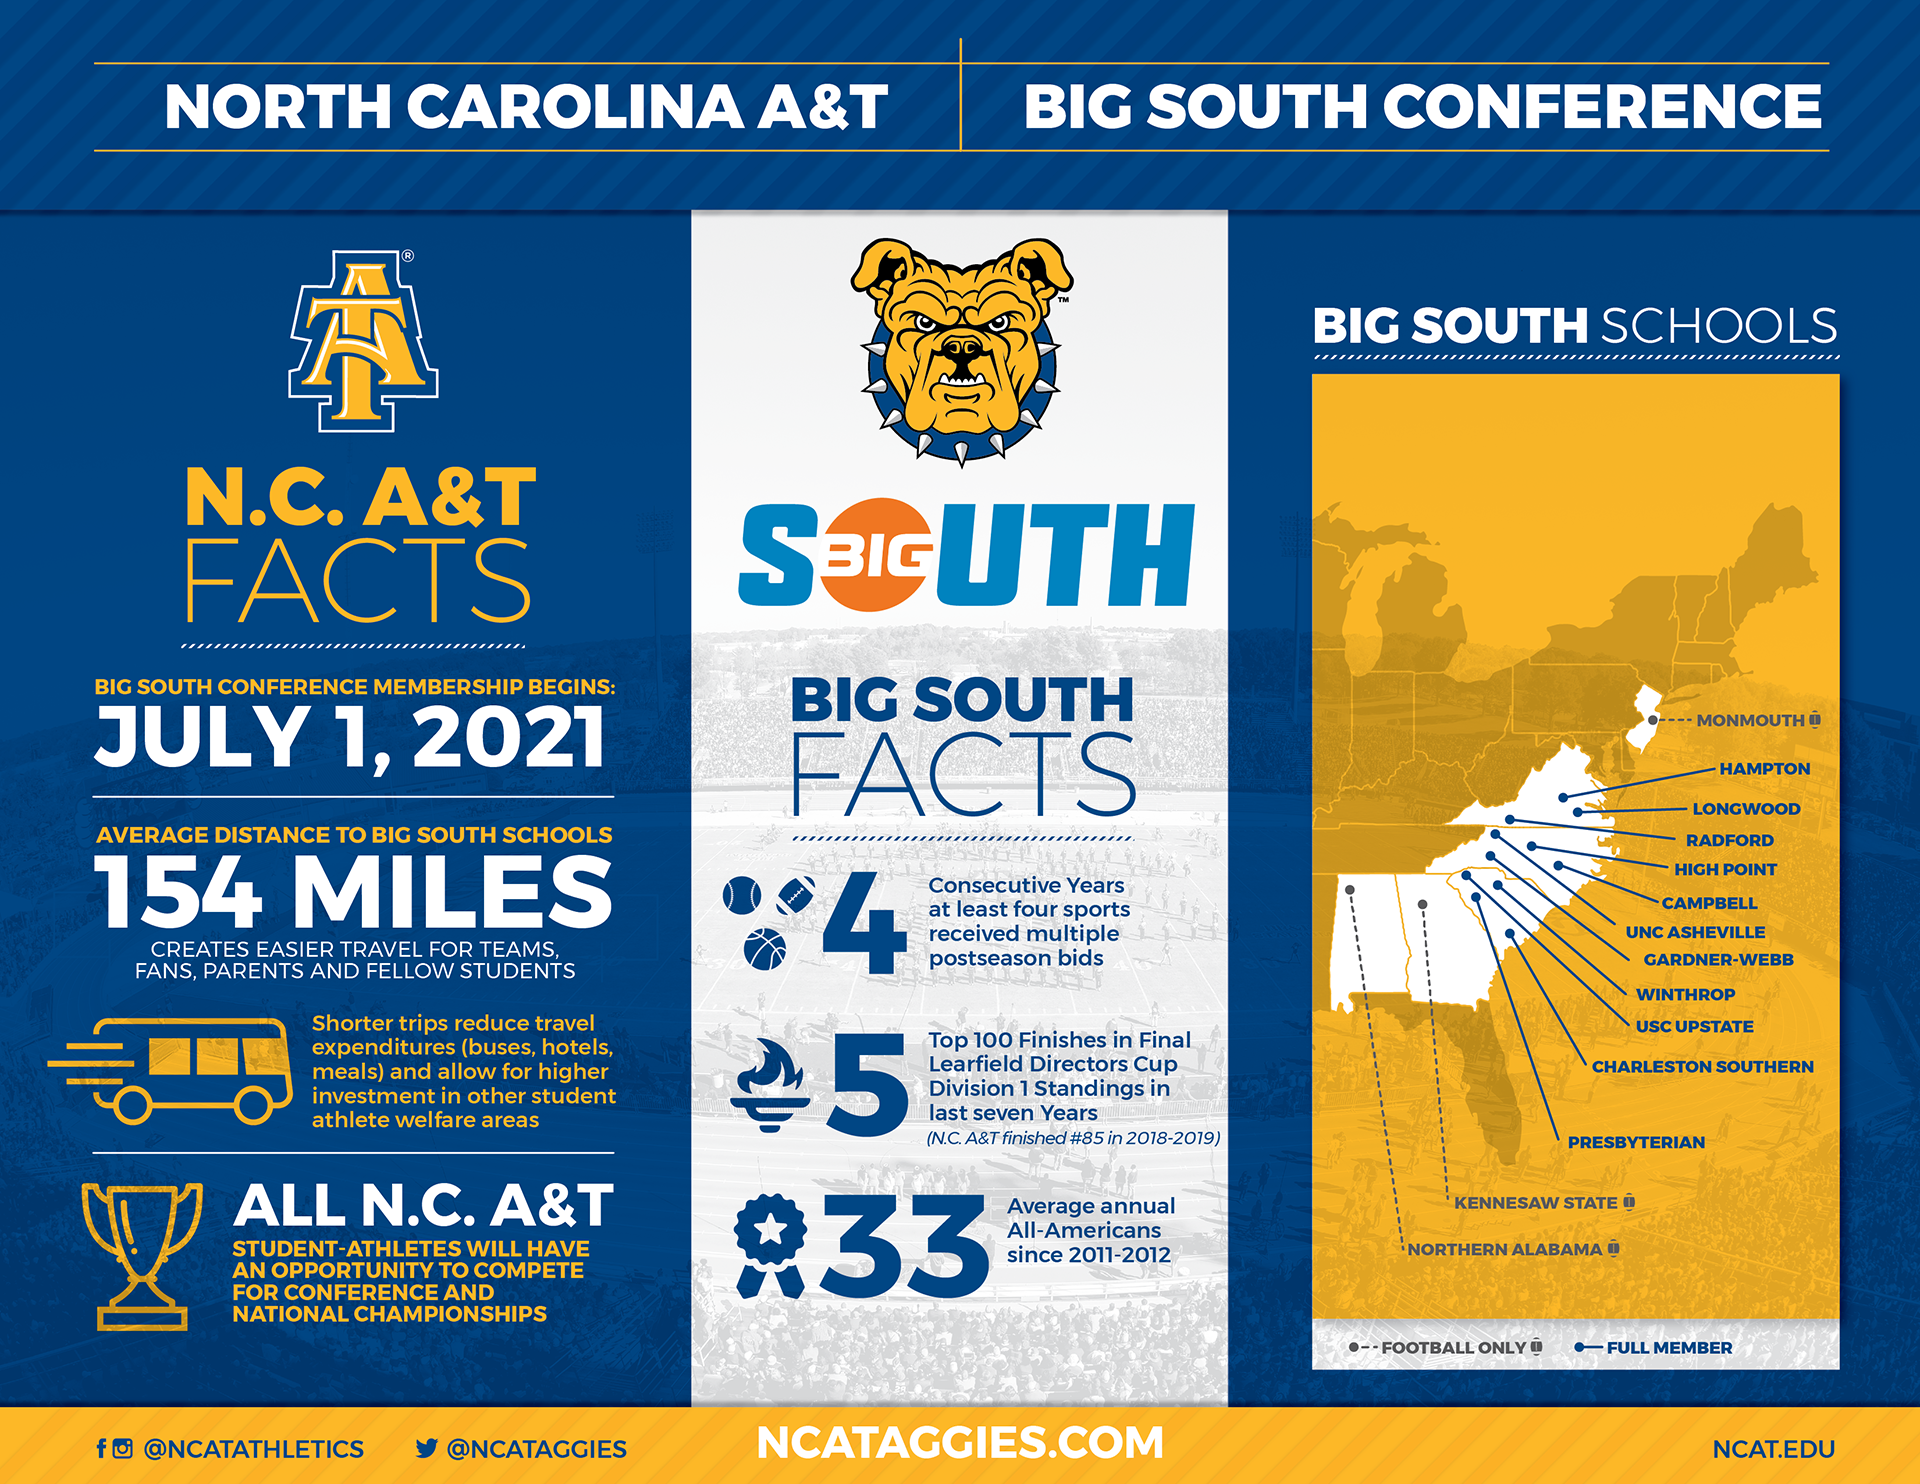 NC A&T Logo Big South Logo  Map of Schools Campbell (Buies Creek, NC) Charleston Southern (Charleston, SC) Gardner-Webb (Boiling Springs, NC) Hampton (Hampton, VA) High Point (High Point, NC) Longwood (Farmville, VA) Presbyterian (Clinton, SC) Radford (Radford, VA) UNC Asheville (Asheville, NC) USC Upstate (Spartanburg, SC) Winthrop (Rock Hill, SC) Kennesaw State (Football Only Member) (Kennesaw, GA) Monmouth (Football Only Member) (West Long Branch, NJ) North Alabama (Football Only Member) (Florence, AL)  NC A&T Facts • Big South Conference Membership begins: July 1, 2021 • Average distance to Big South schools is 154 miles. Creates easier travel for teams, fans, parents and fellow students • Shorter trips reduce travel expenditures (buses, hotels, meals) and allow for higher investment in other student athlete welfare areas • All NC A&T student-athletes will have an opportunity to compete for conference & national championship. (Women’s golf currently cannot)  Big South Facts • 4 Consecutive Years at least four sports received multiple postseason bids • 5 Top 100 Finishes in Final Learfield Directors Cup Division 1 Standings in last seven Years (NC A&T finished #85 in 2018-2019) • 33 Average annual All-Americans since 2011-2012   NCATAGGIES.COM NCAT.EDU